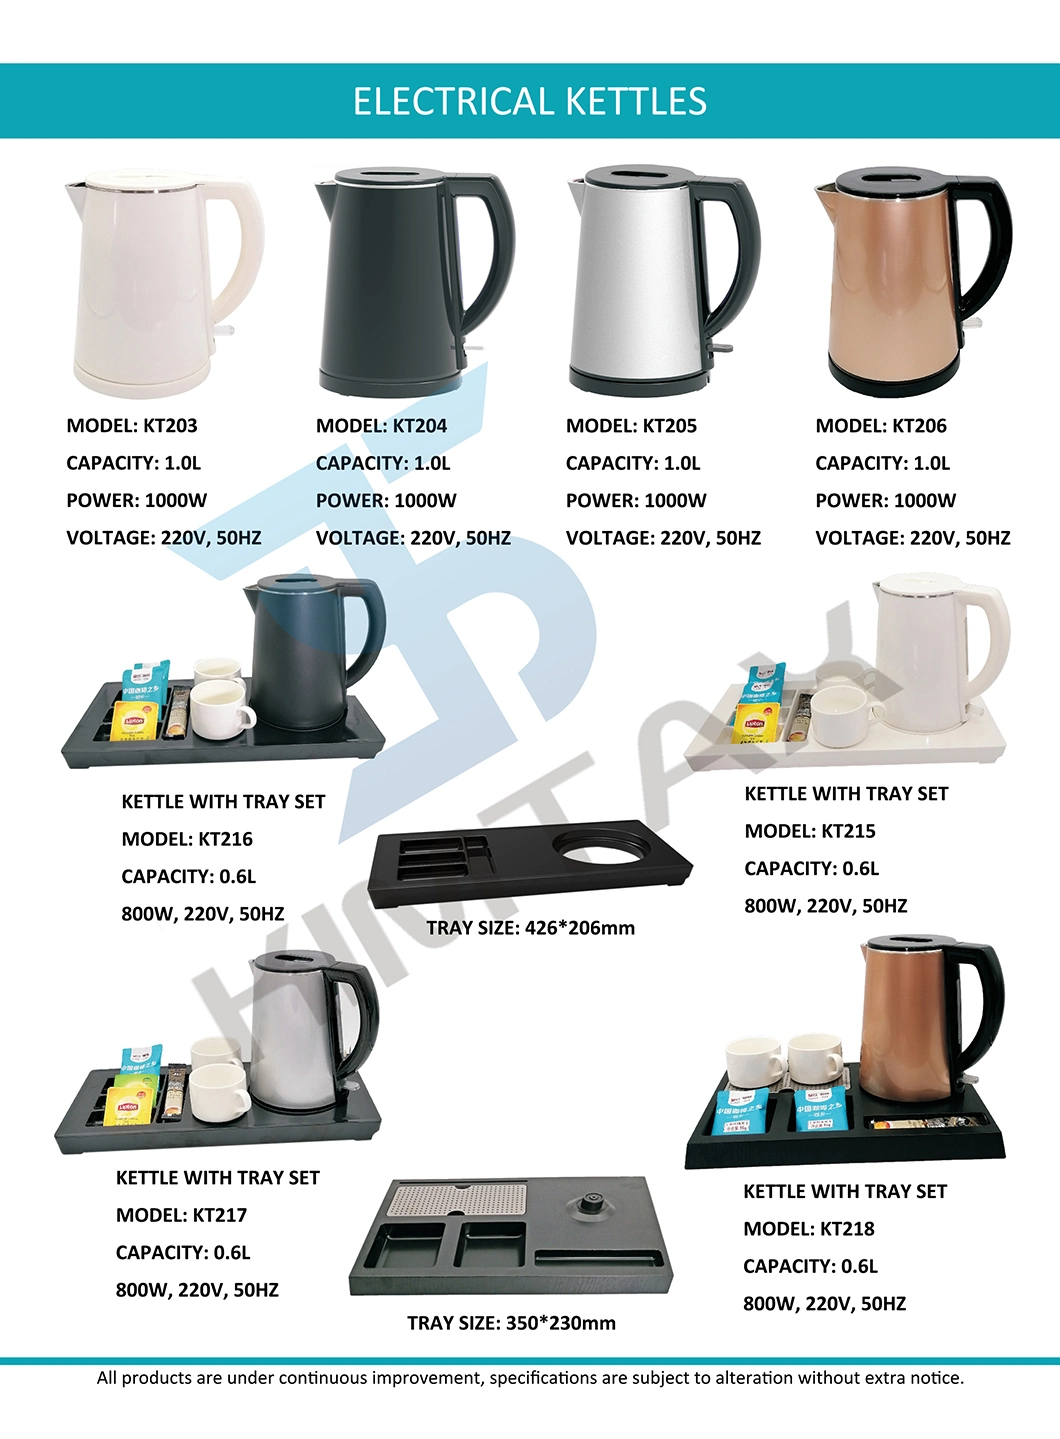 Black 1.0L Hotel Electric Kettle with Tray